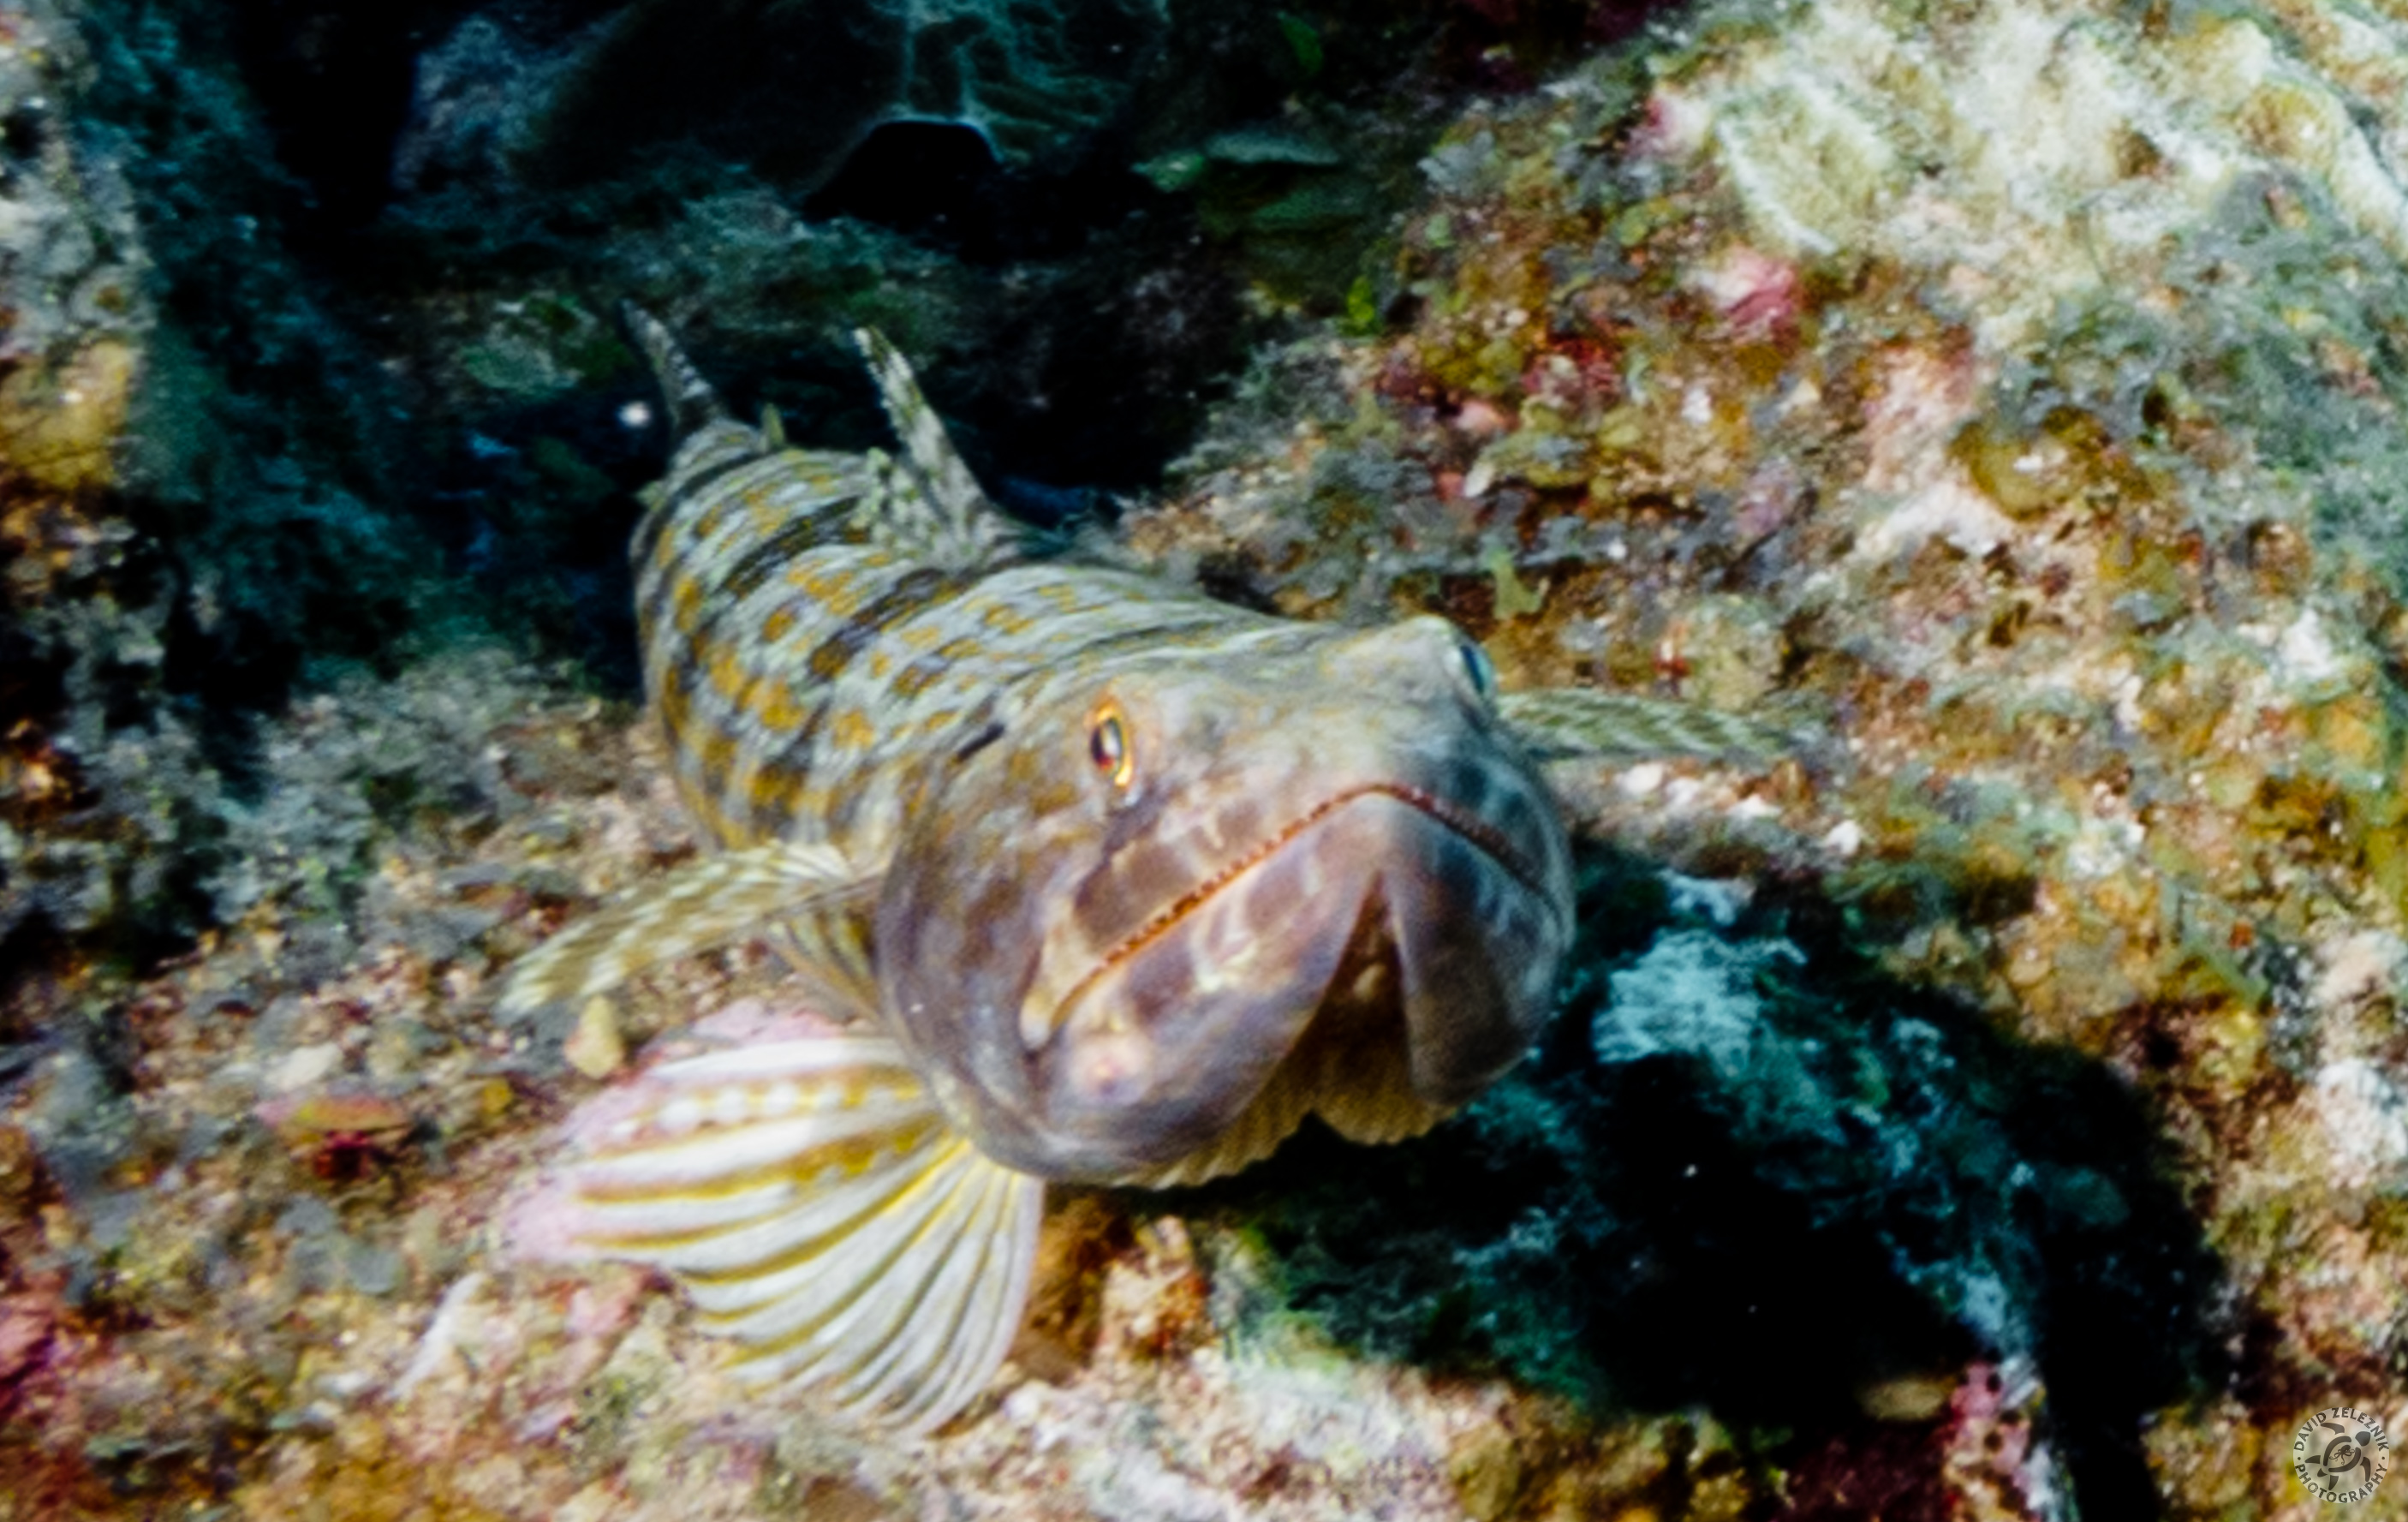 A Sand Diver, member of the Lizardfish family, perched on the reef